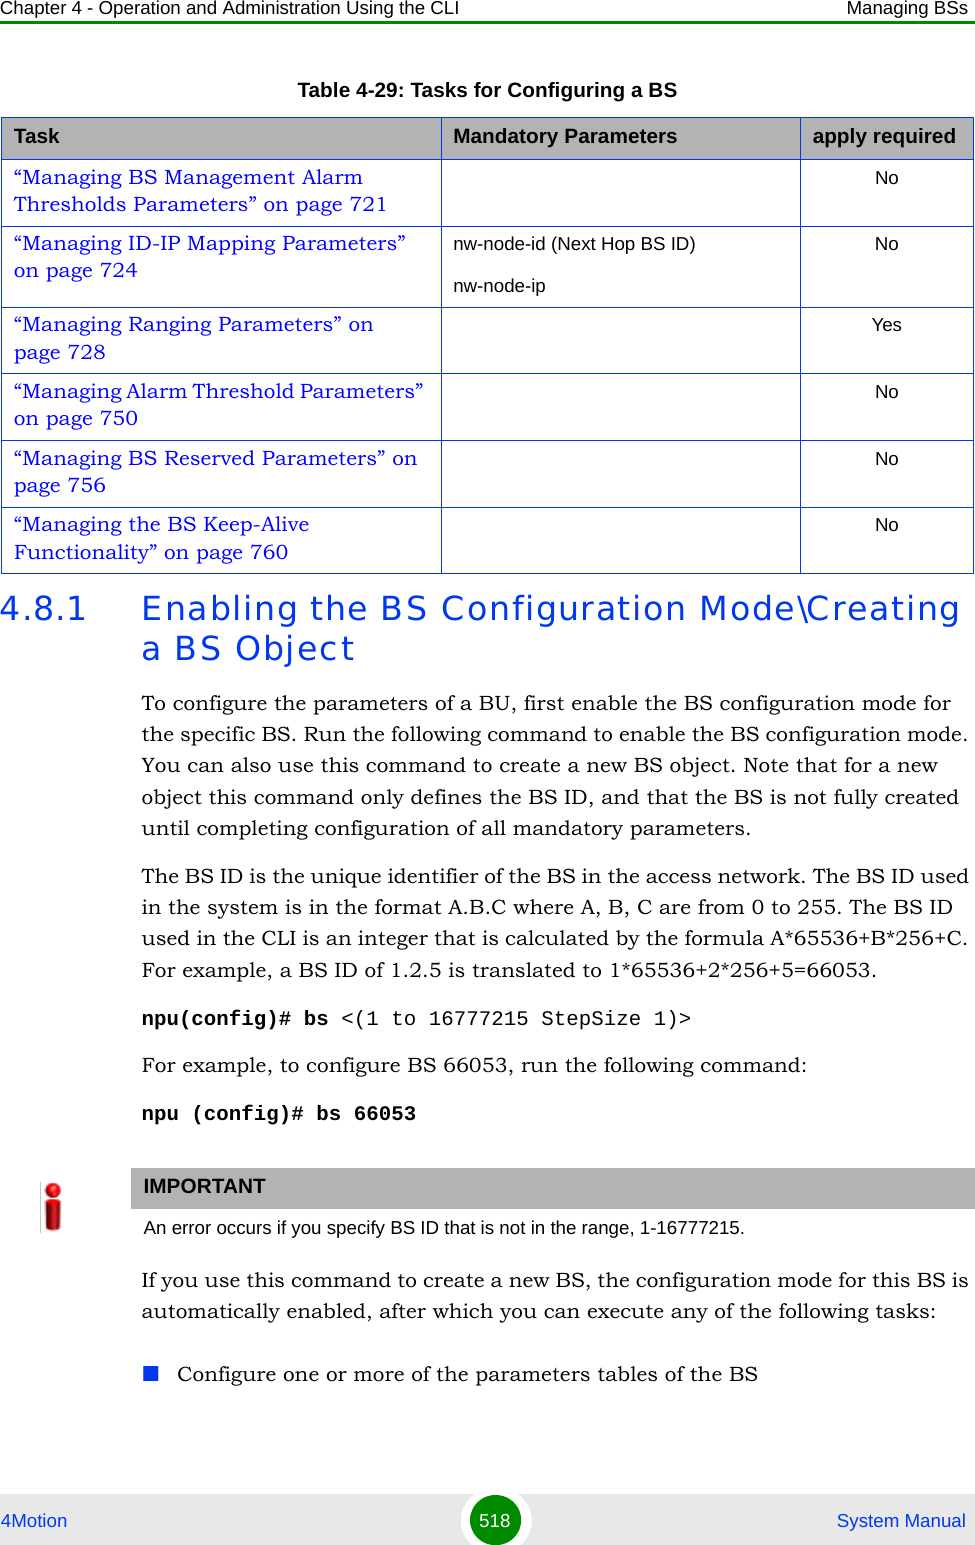 Chapter 4 - Operation and Administration Using the CLI Managing BSs4Motion 518  System Manual4.8.1 Enabling the BS Configuration Mode\Creating a BS ObjectTo configure the parameters of a BU, first enable the BS configuration mode for the specific BS. Run the following command to enable the BS configuration mode. You can also use this command to create a new BS object. Note that for a new object this command only defines the BS ID, and that the BS is not fully created until completing configuration of all mandatory parameters.The BS ID is the unique identifier of the BS in the access network. The BS ID used in the system is in the format A.B.C where A, B, C are from 0 to 255. The BS ID used in the CLI is an integer that is calculated by the formula A*65536+B*256+C. For example, a BS ID of 1.2.5 is translated to 1*65536+2*256+5=66053.npu(config)# bs &lt;(1 to 16777215 StepSize 1)&gt;For example, to configure BS 66053, run the following command:npu (config)# bs 66053If you use this command to create a new BS, the configuration mode for this BS is automatically enabled, after which you can execute any of the following tasks:Configure one or more of the parameters tables of the BS“Managing BS Management Alarm Thresholds Parameters” on page 721No“Managing ID-IP Mapping Parameters” on page 724nw-node-id (Next Hop BS ID)nw-node-ipNo“Managing Ranging Parameters” on page 728Yes“Managing Alarm Threshold Parameters” on page 750No“Managing BS Reserved Parameters” on page 756No“Managing the BS Keep-Alive Functionality” on page 760NoIMPORTANTAn error occurs if you specify BS ID that is not in the range, 1-16777215.Table 4-29: Tasks for Configuring a BSTask Mandatory Parameters apply required